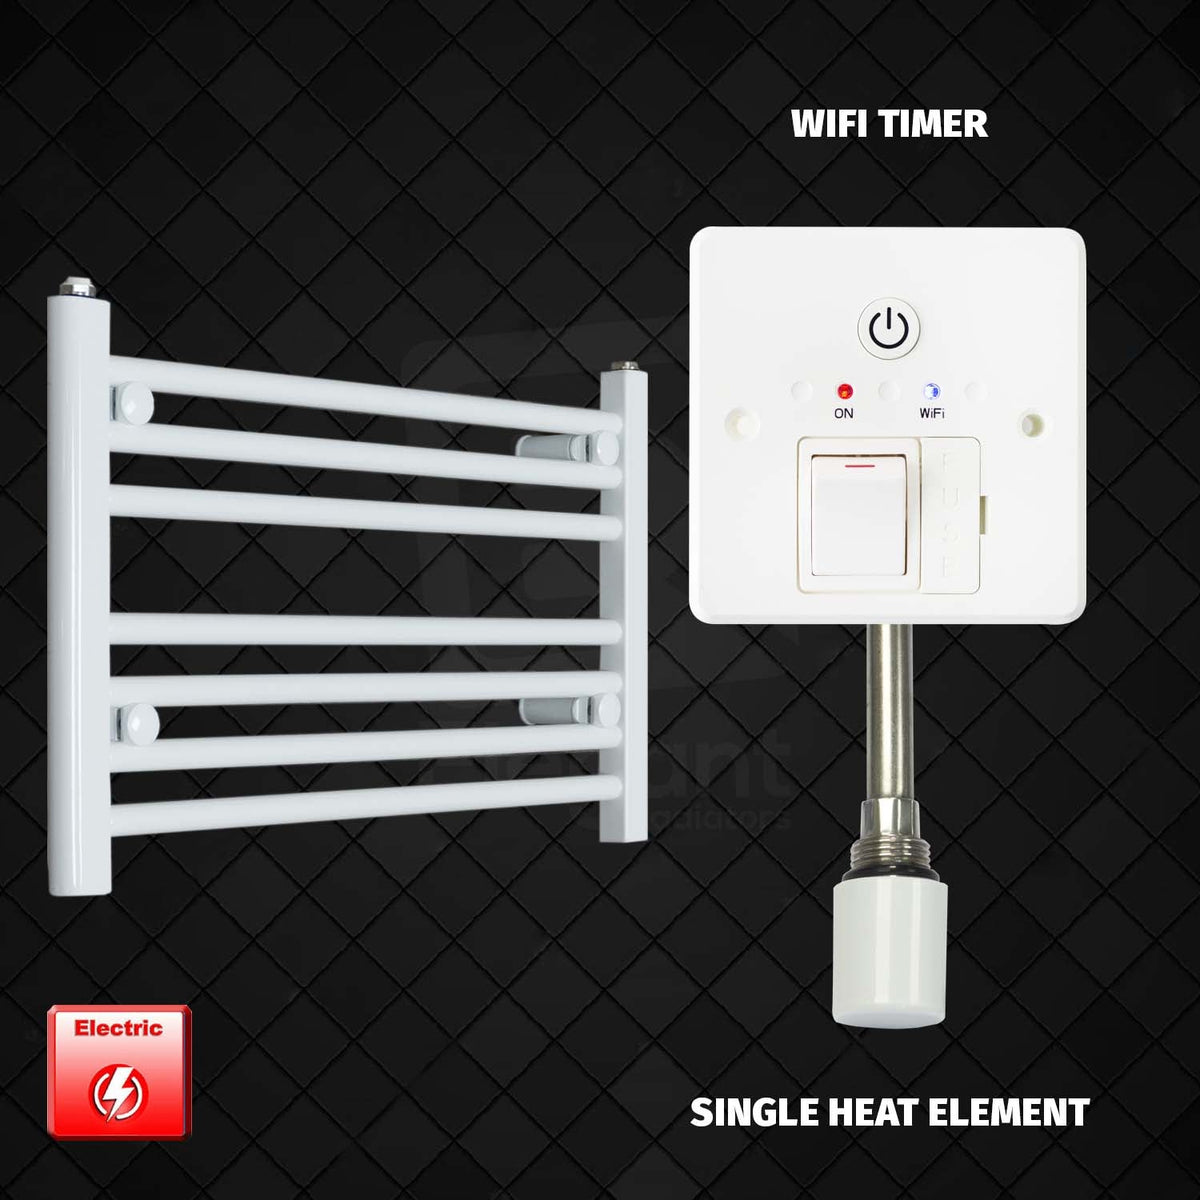 400 x 600 Pre-Filled Electric Heated Towel Radiator White HTR Wifi Timer Single Heat Element